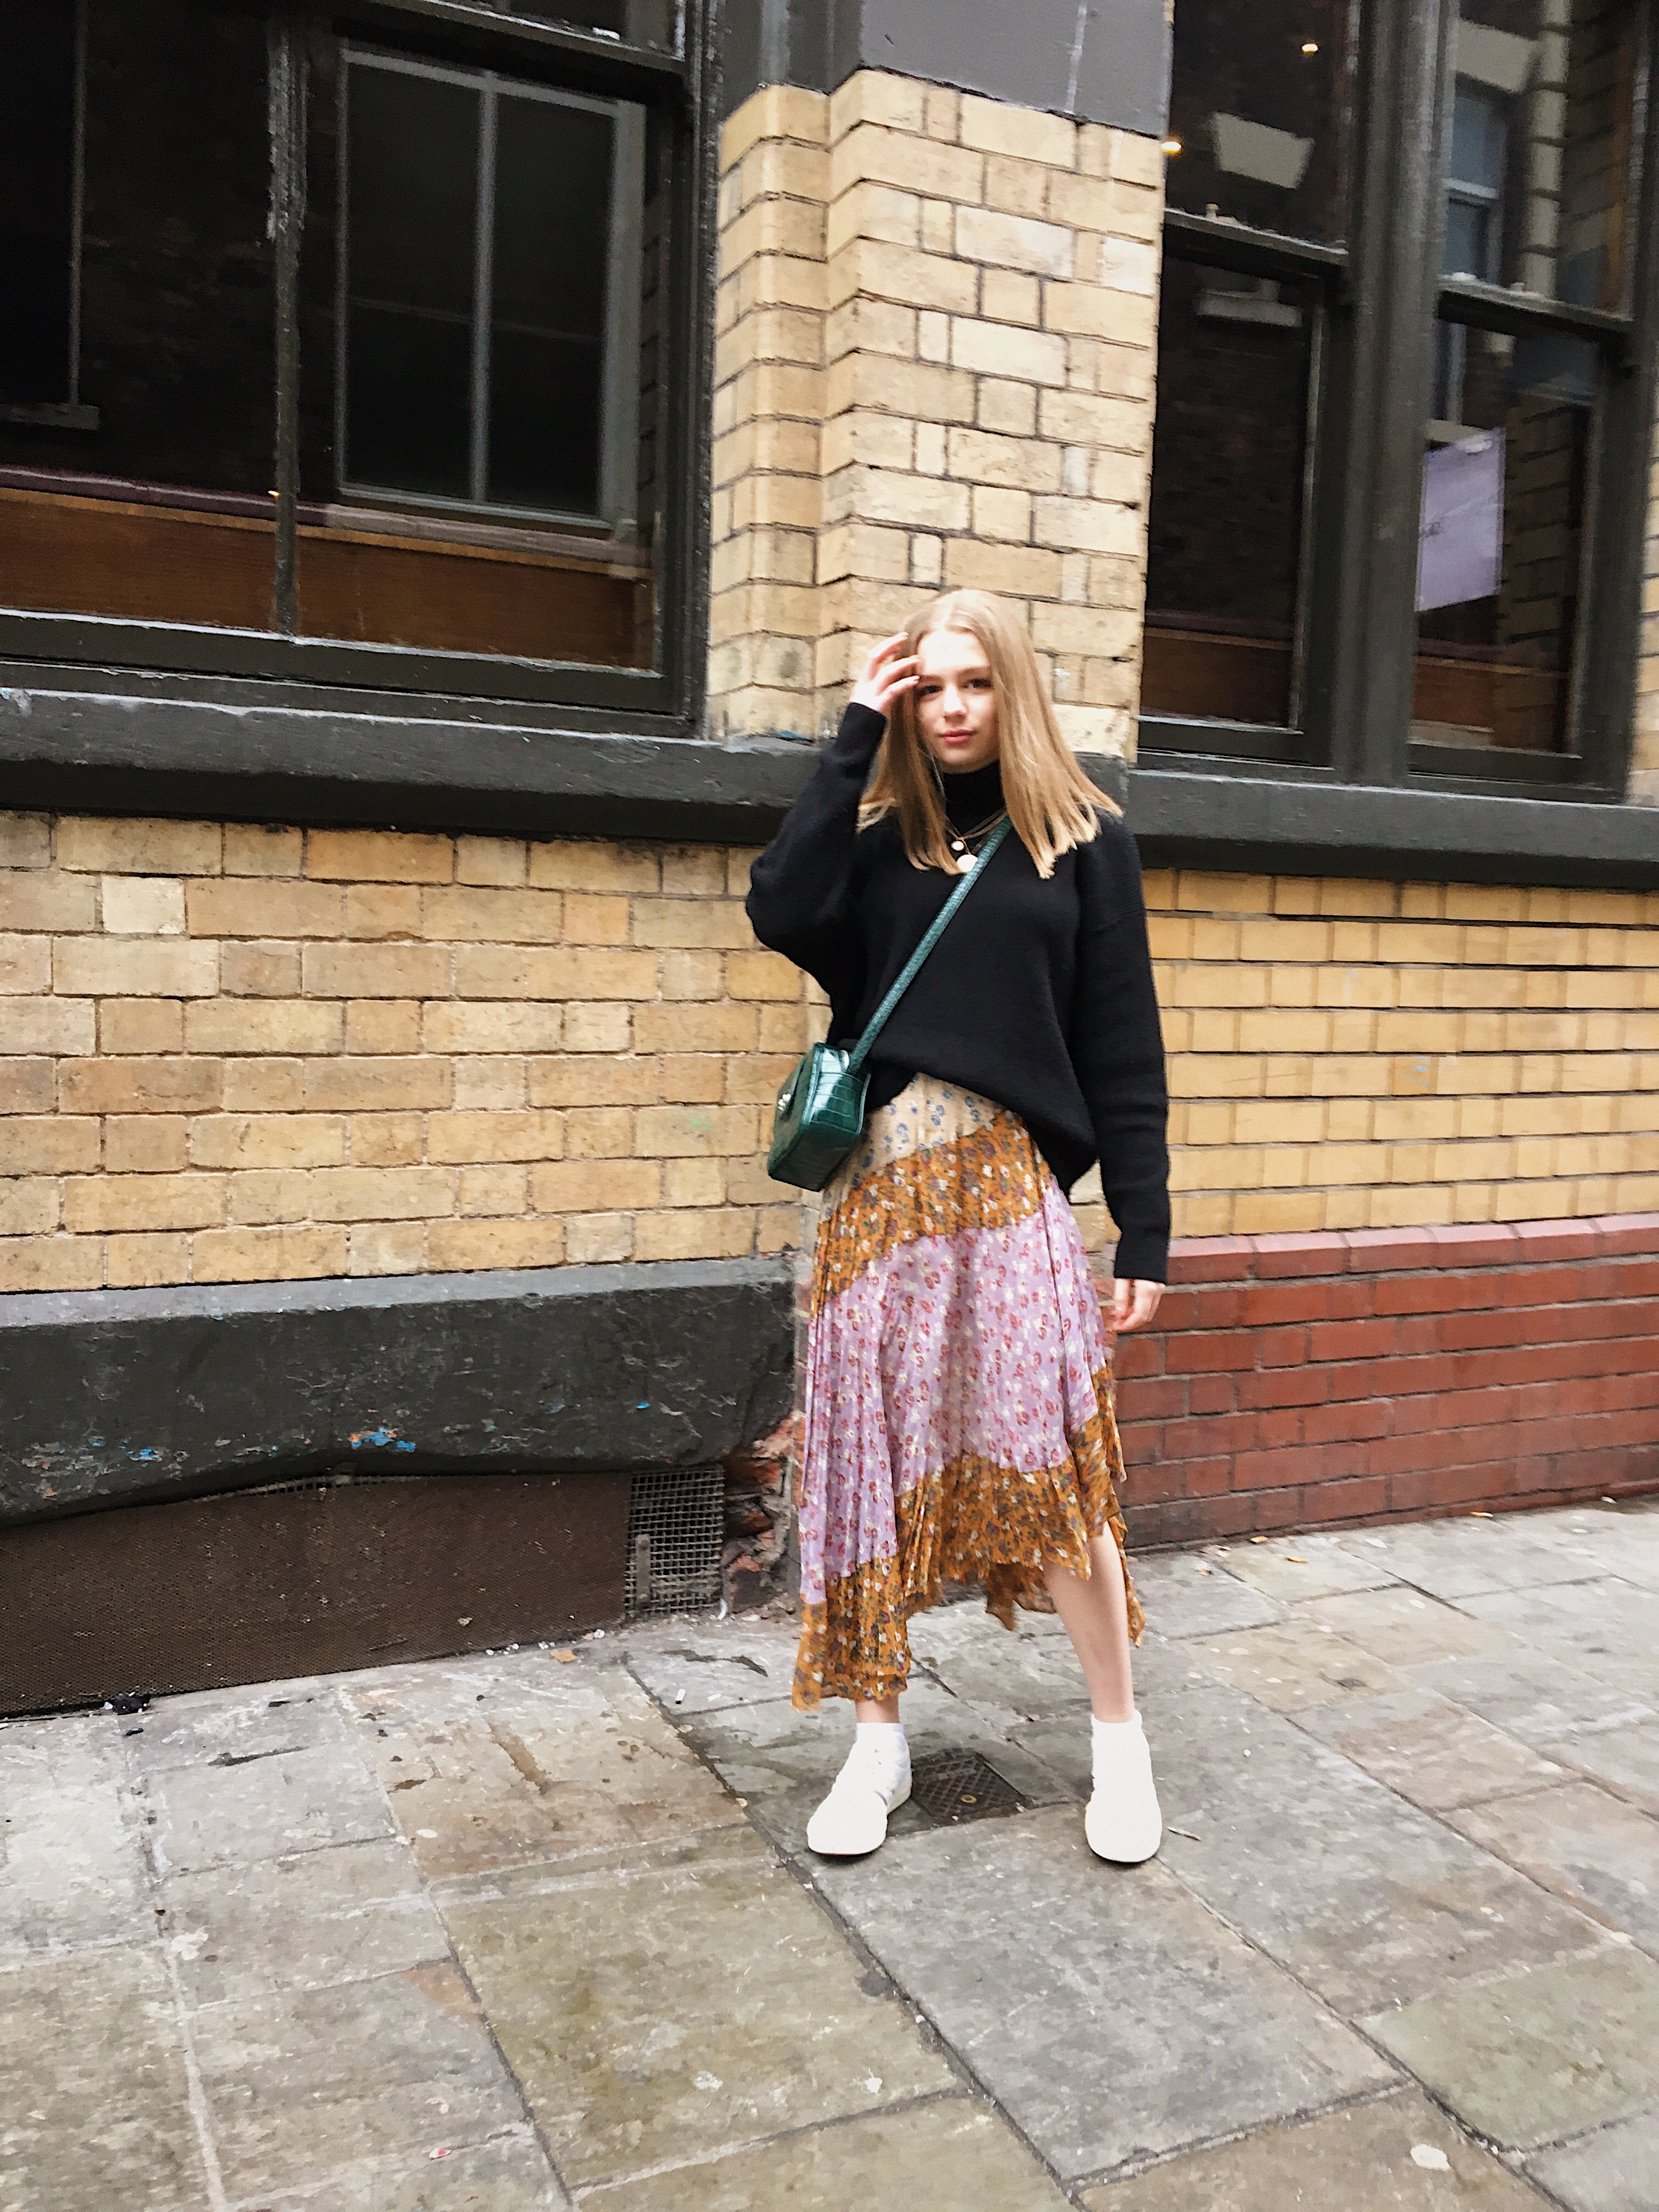 Styling the patchwork skirt